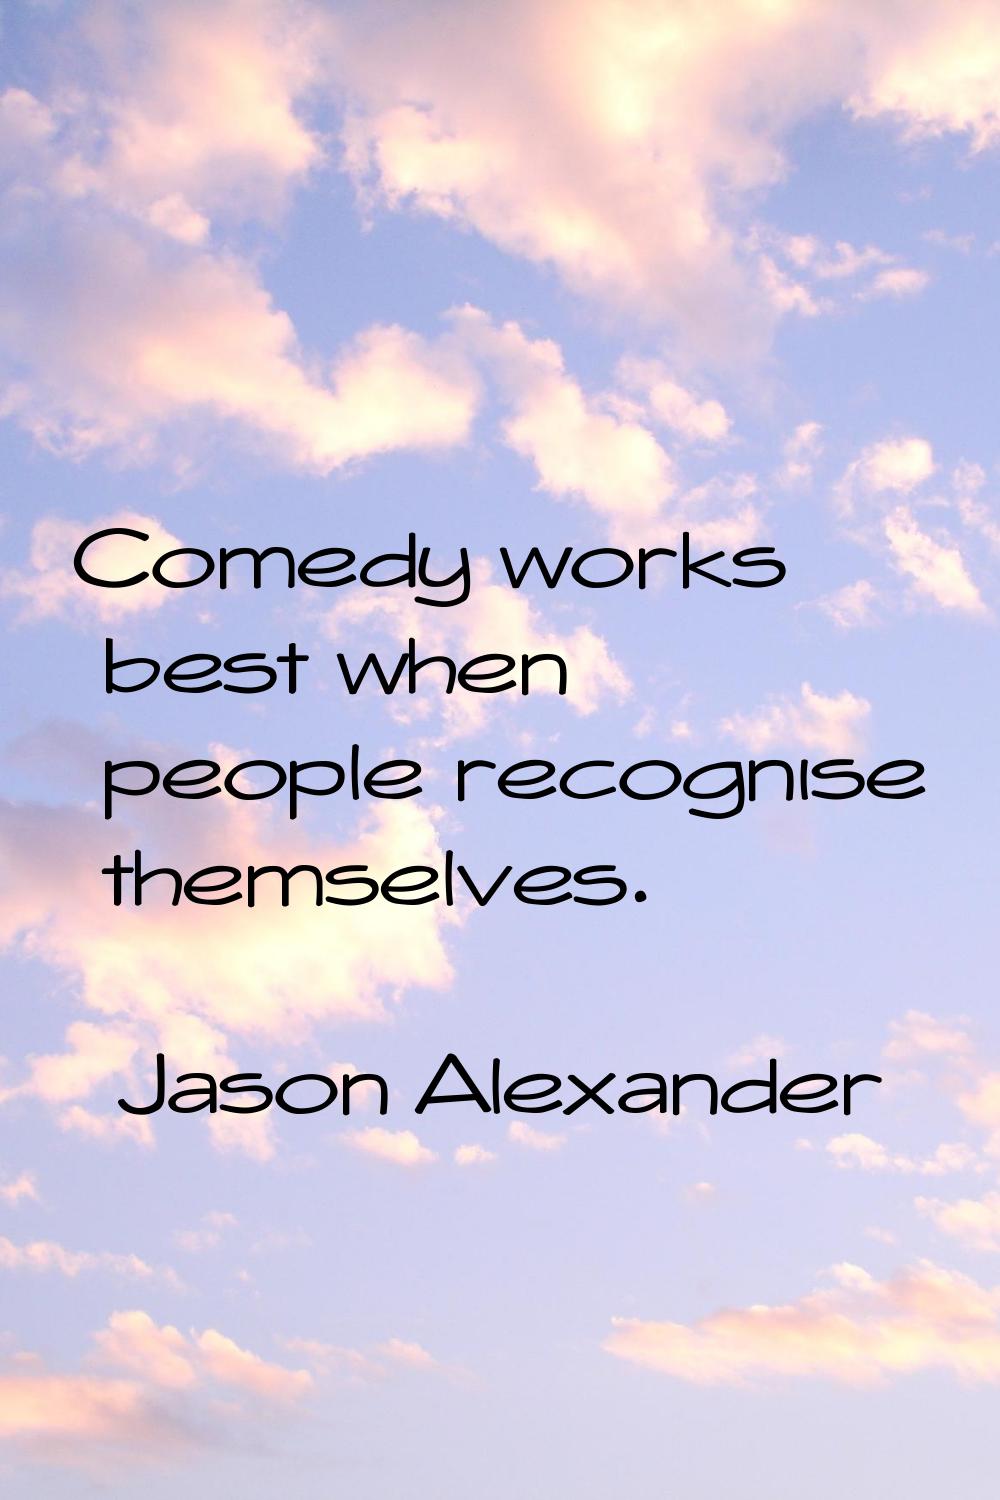 Comedy works best when people recognise themselves.